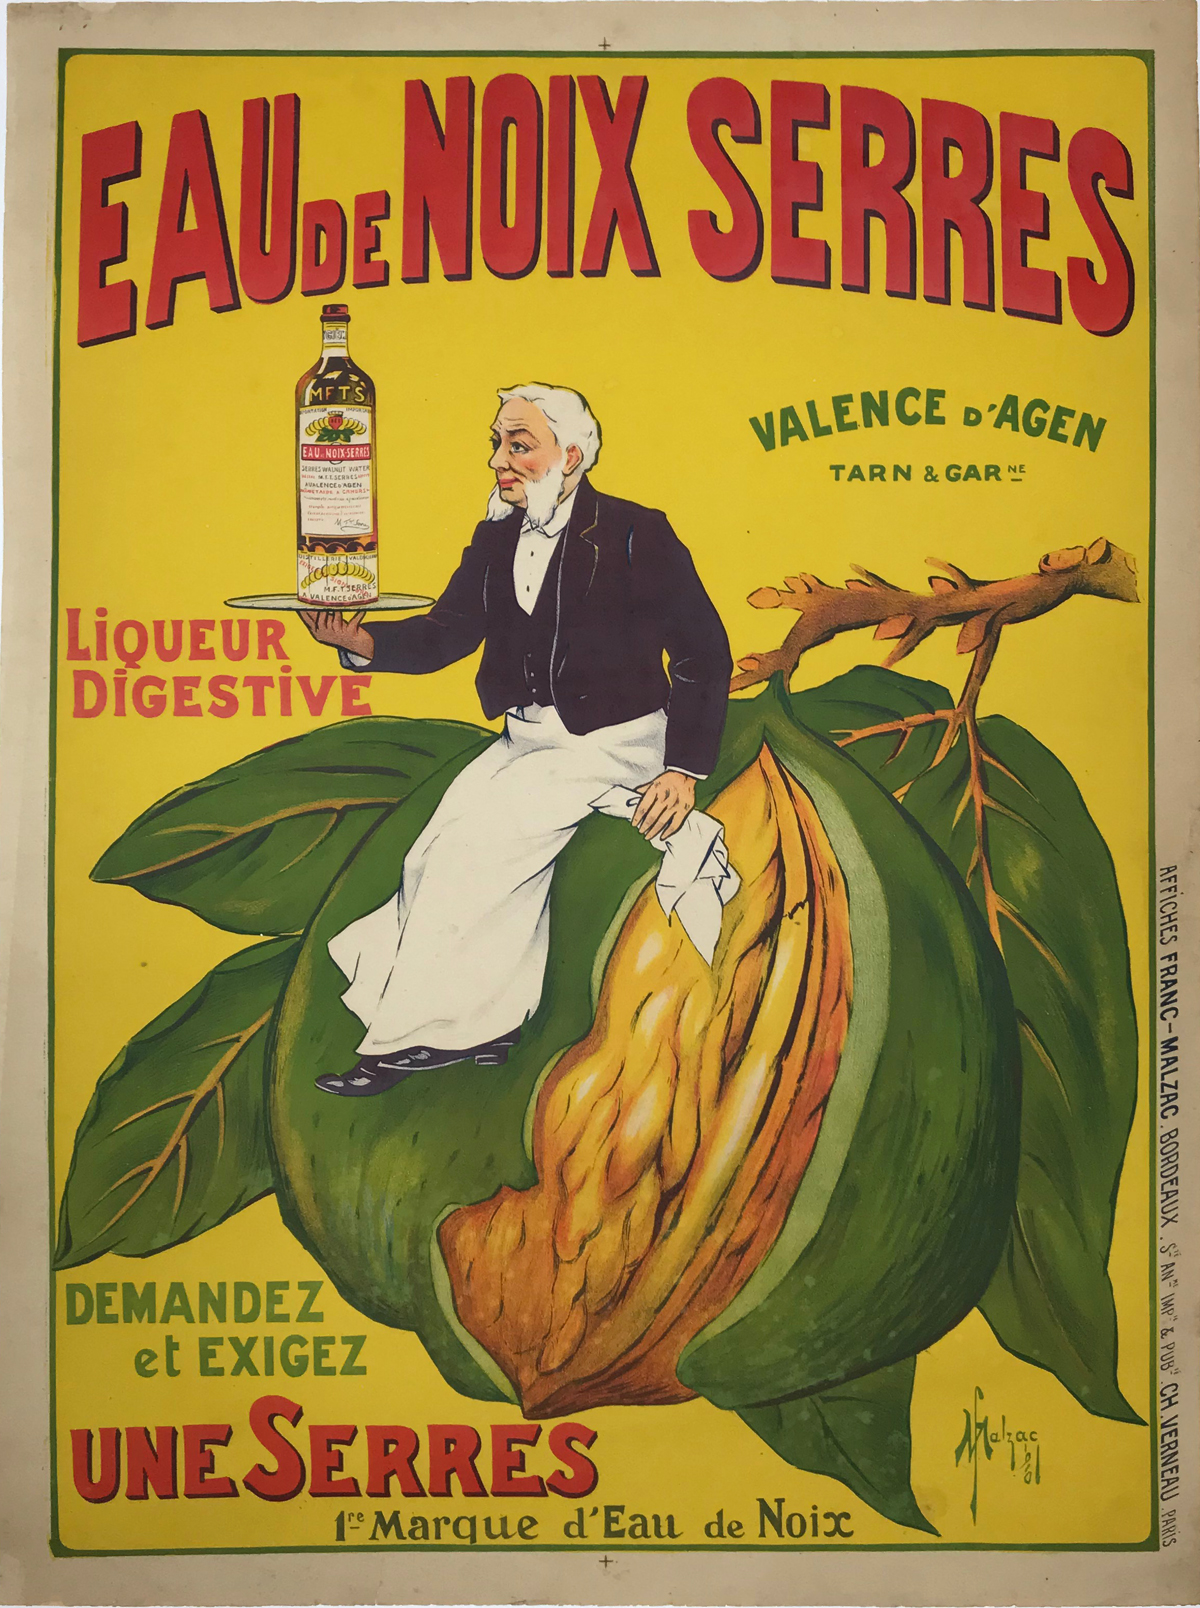 Eau De Noix Serres Liqueur Digestive by Franc Malzac 1910 France - Beautiful Vintage Poster. French wine & spirit poster features a waiter sitting on a giant fruit on a branch while holding a tray with a bottle. Original Antique Posters.